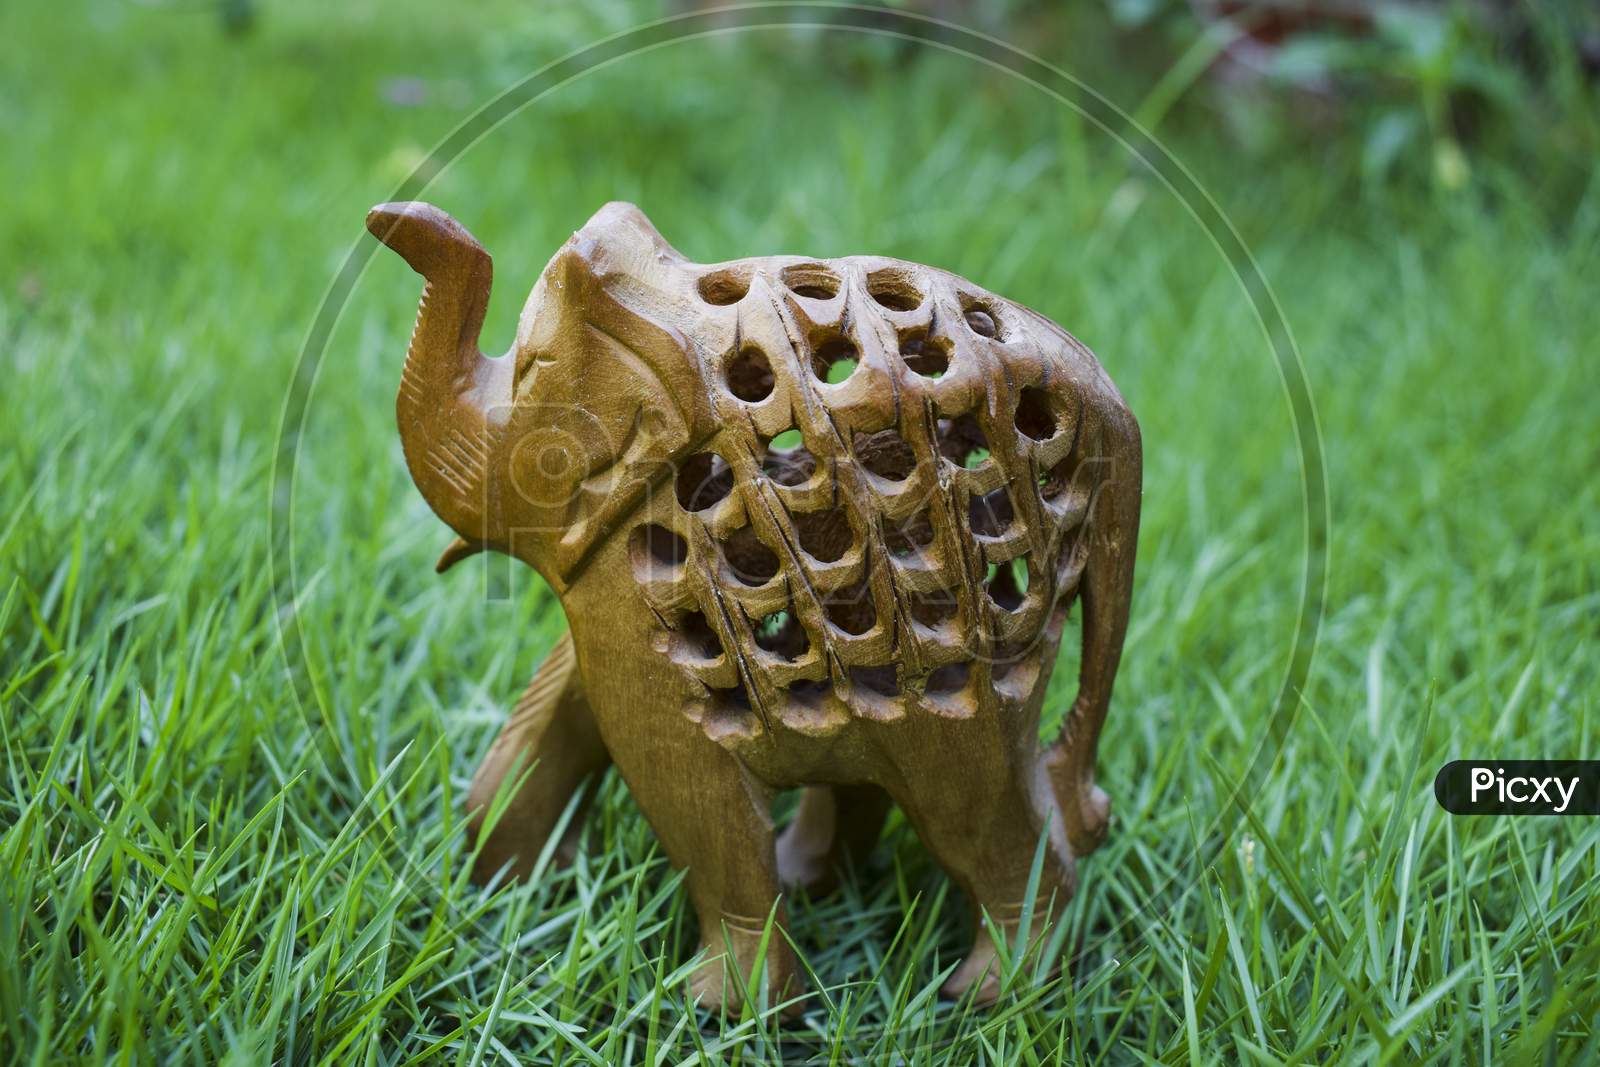 Elephant Within Another Elephant Made Of Kadamb Wood With Intricate Carving, Handcrafted By Artisans Of Rajasthan In India